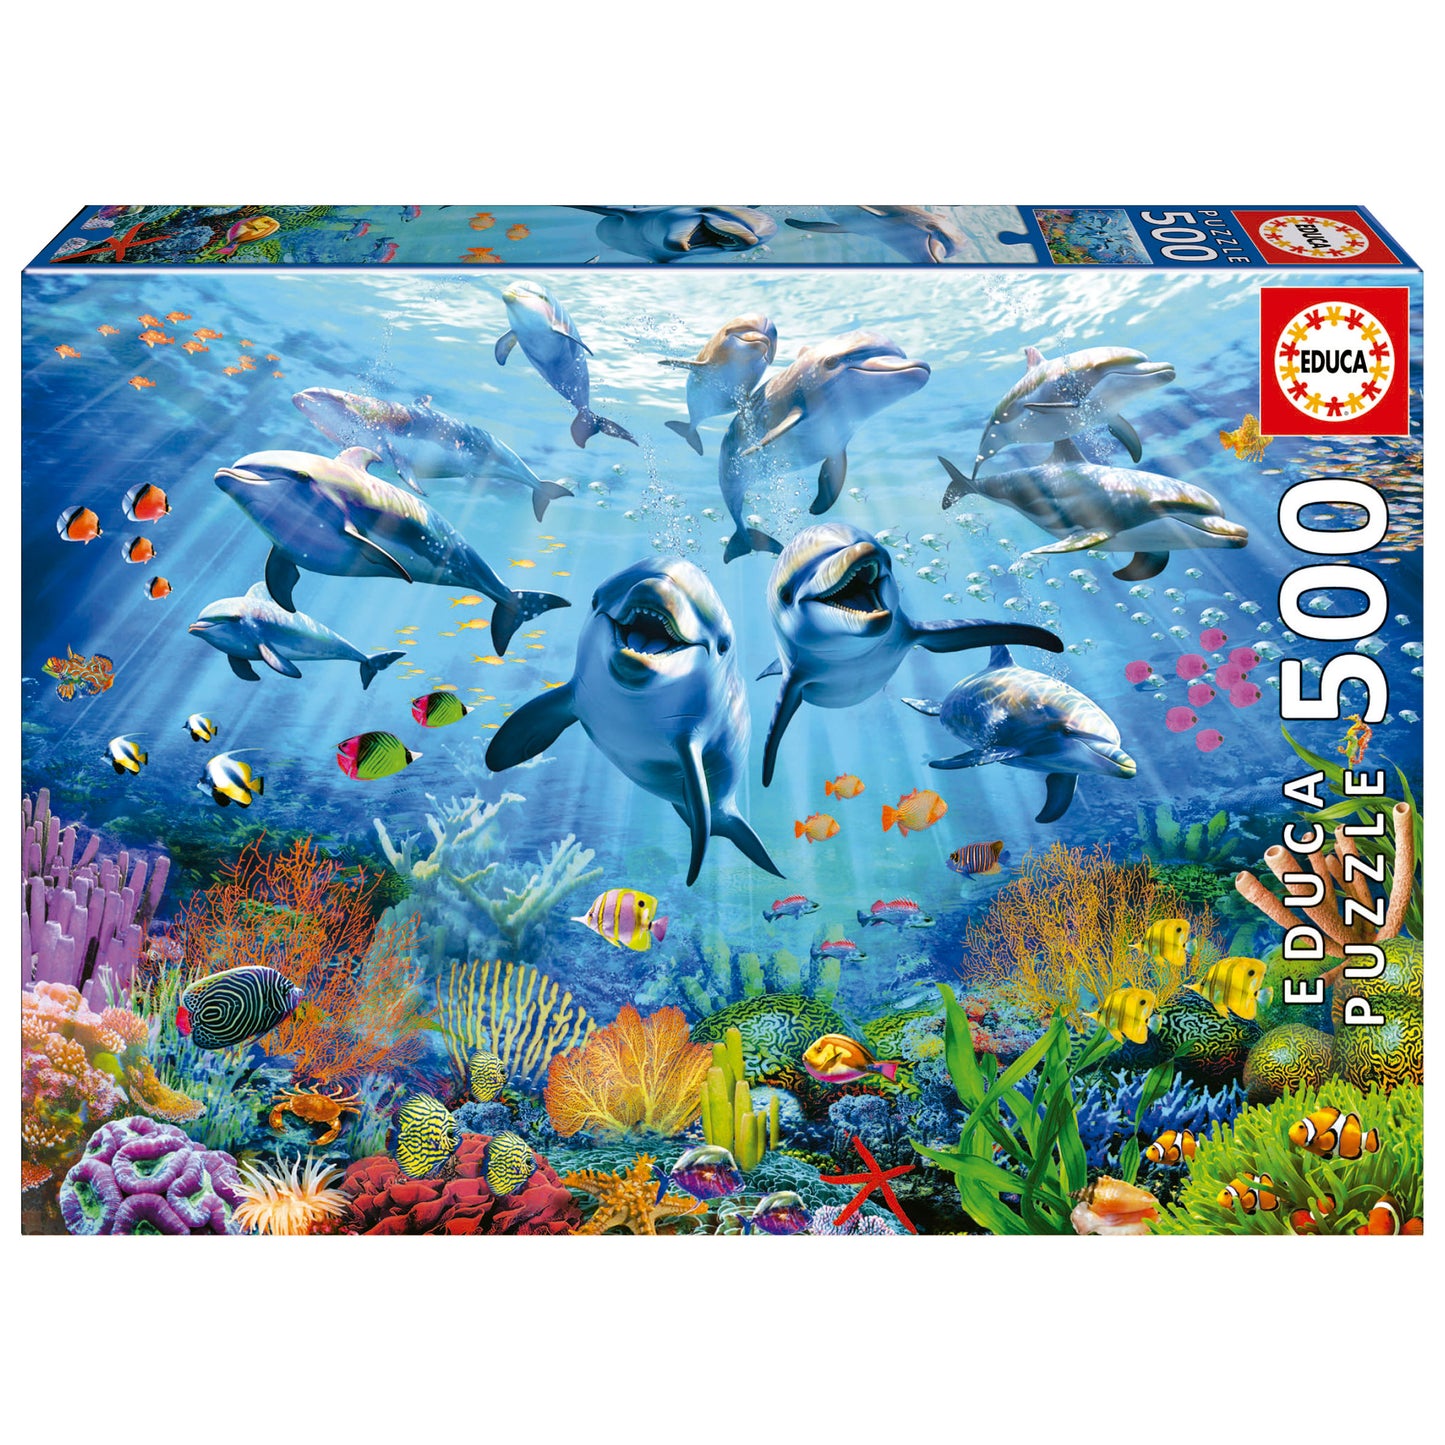 Party Under the Sea by Adrian Chesterman, 500 Piece Puzzle